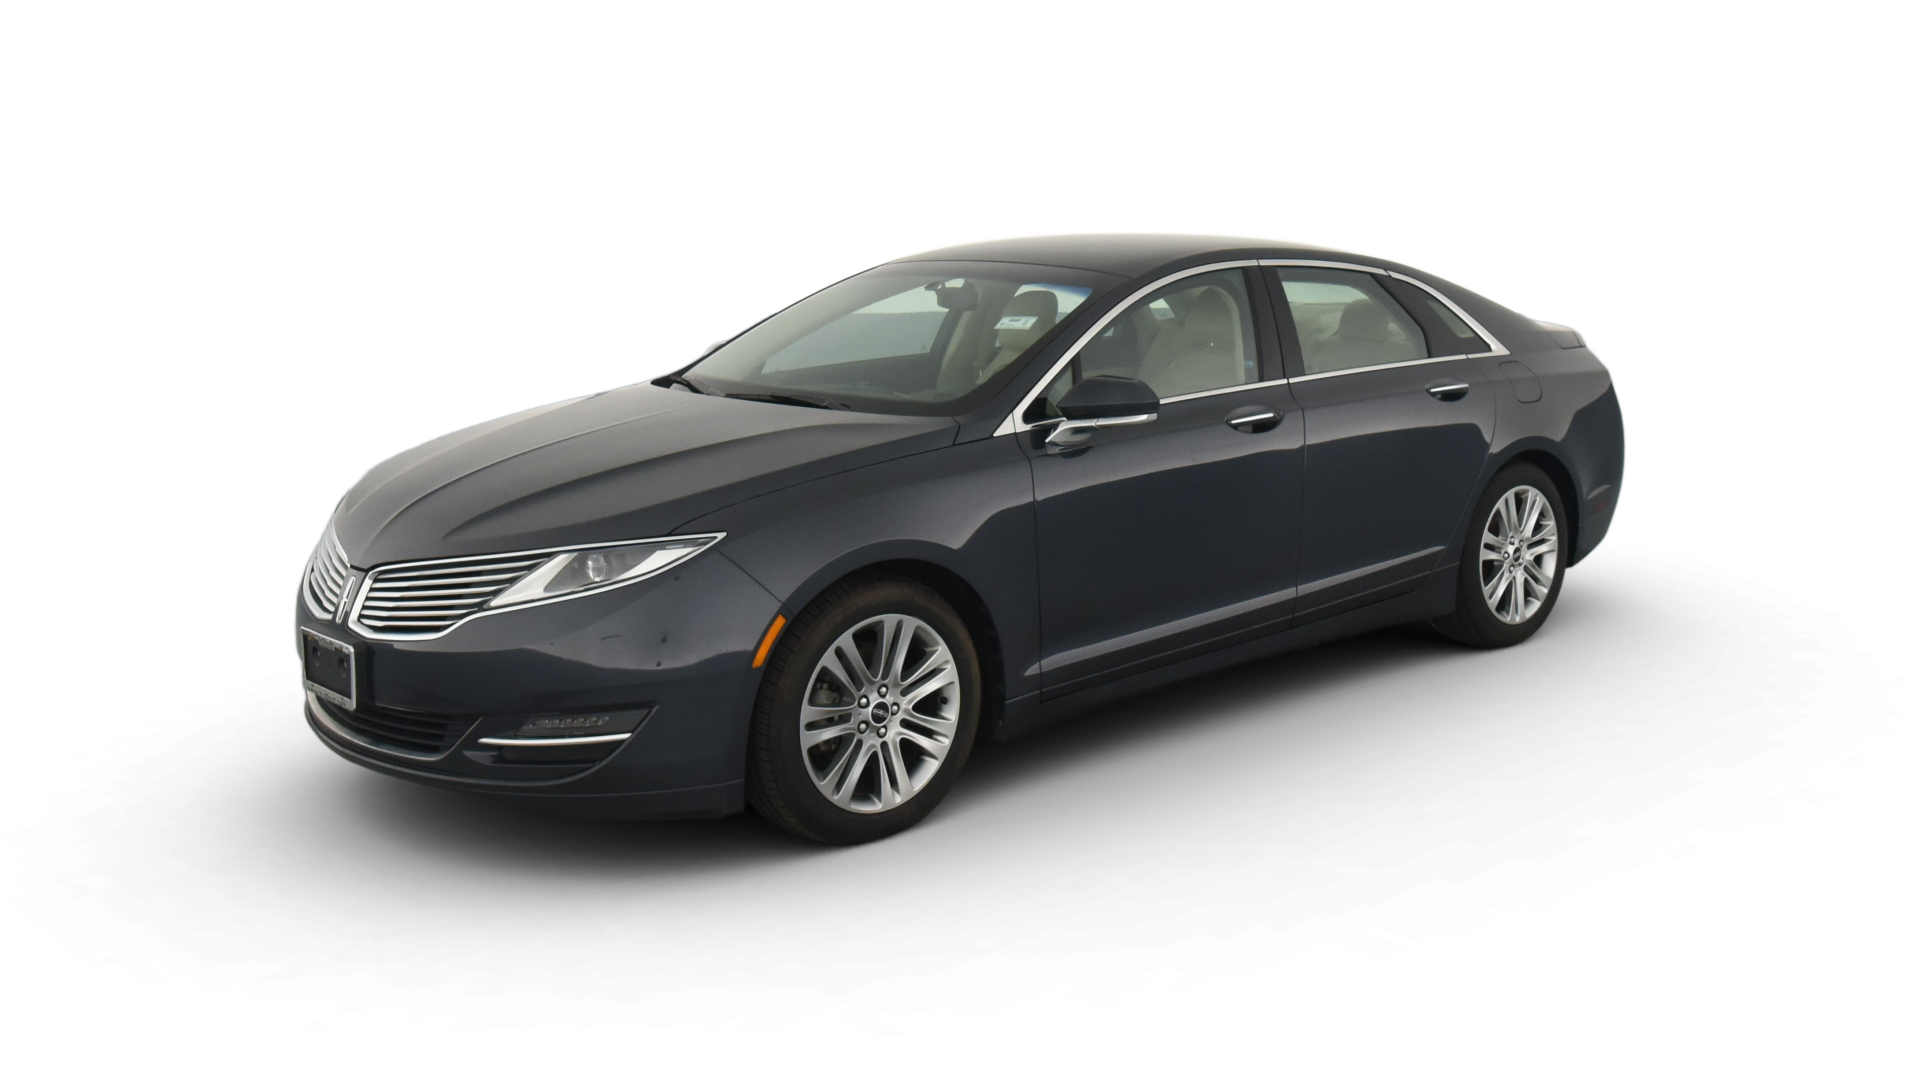 Used Gray Lincoln MKZ Hybrid For Sale Online | Carvana